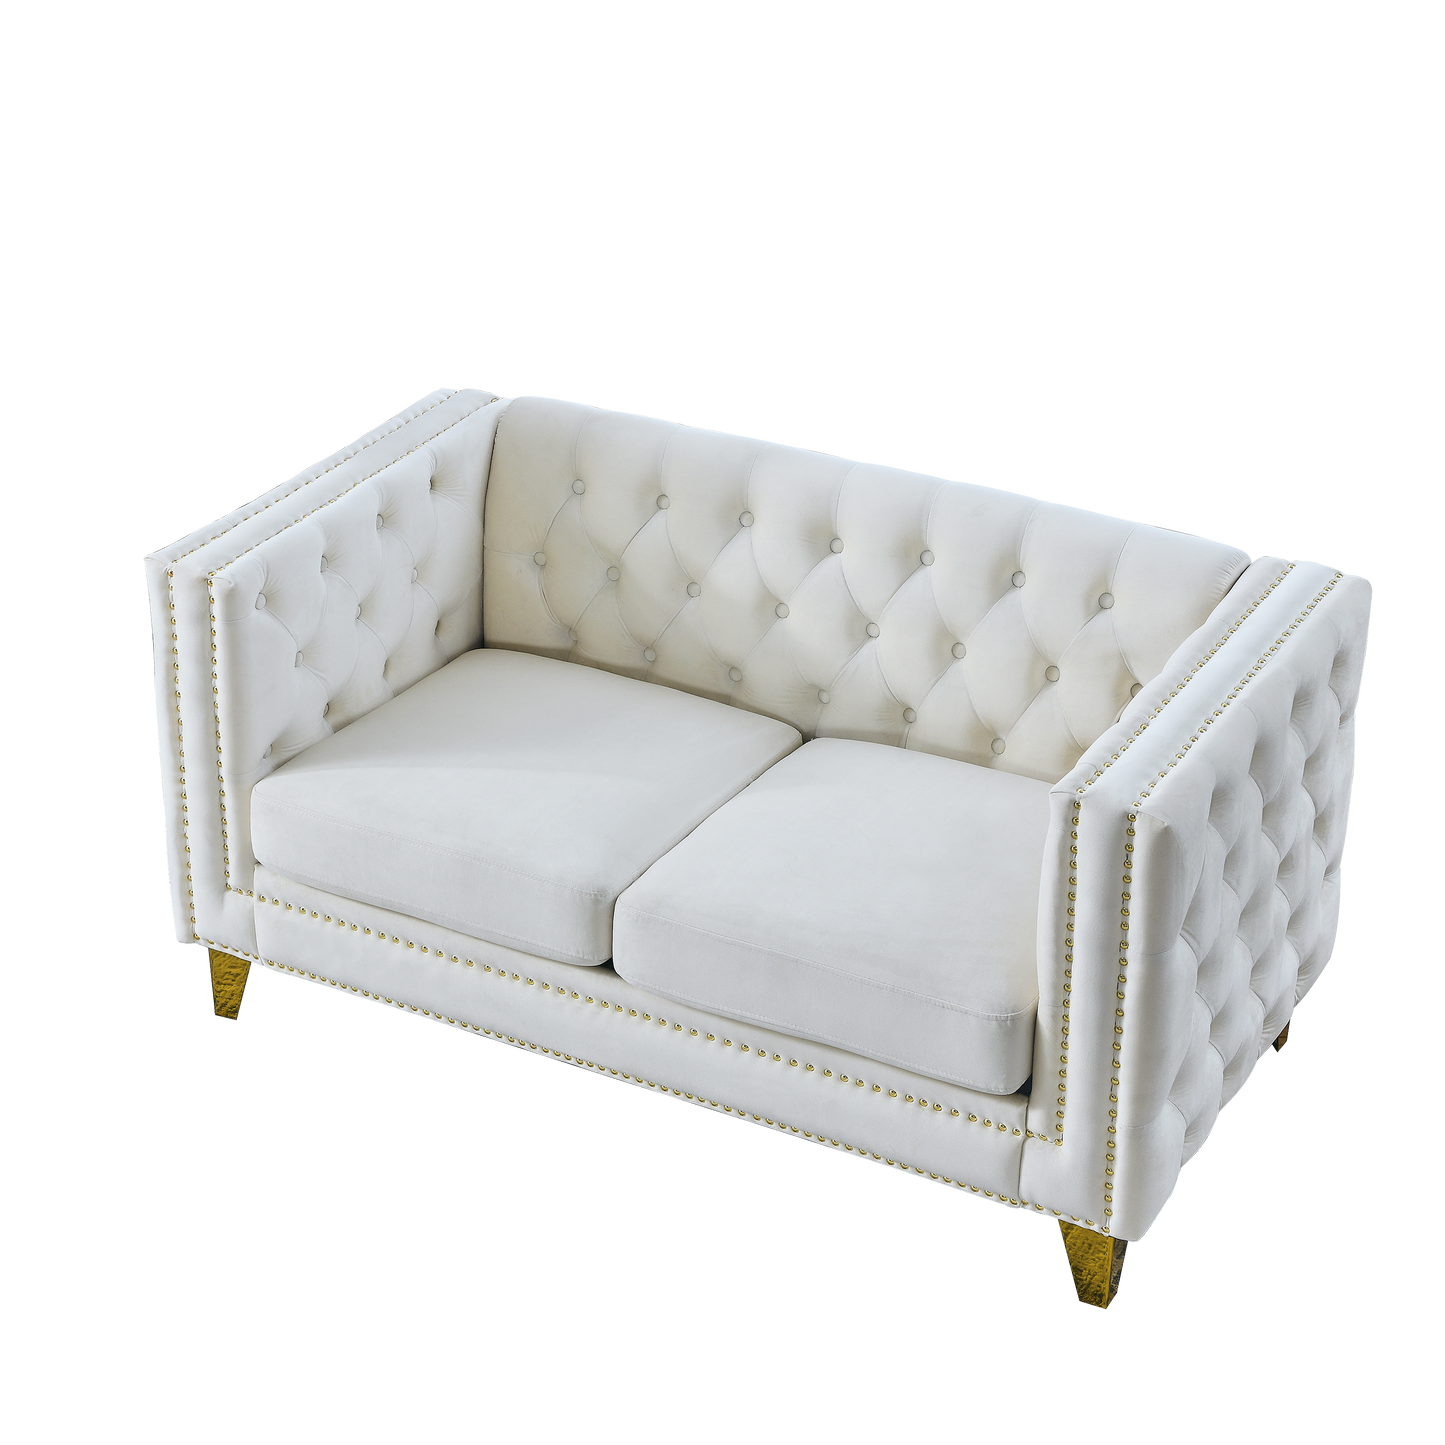 {Contact us for 3D modeling} Velvet Sofa for Living Room,Buttons Tufted Square Arm Couch, Modern Couch Upholstered Button and Metal Legs, Sofa Couch for Bedroom, Beige Velvet-2S